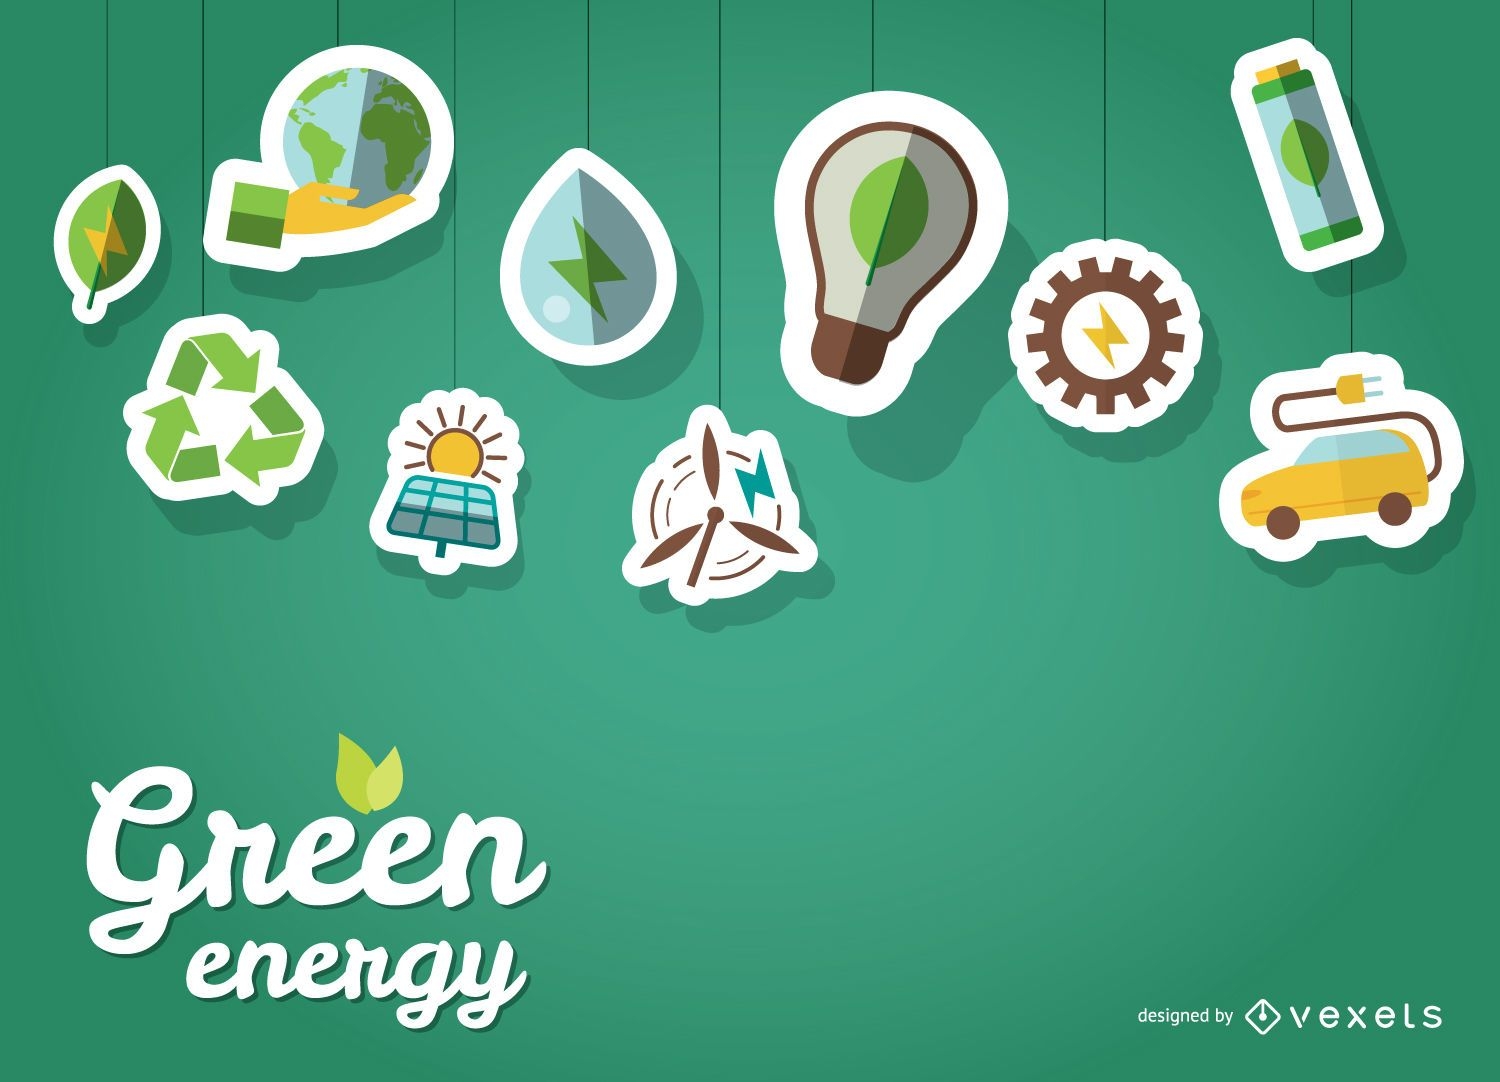 Green energy wallpaper with stickers